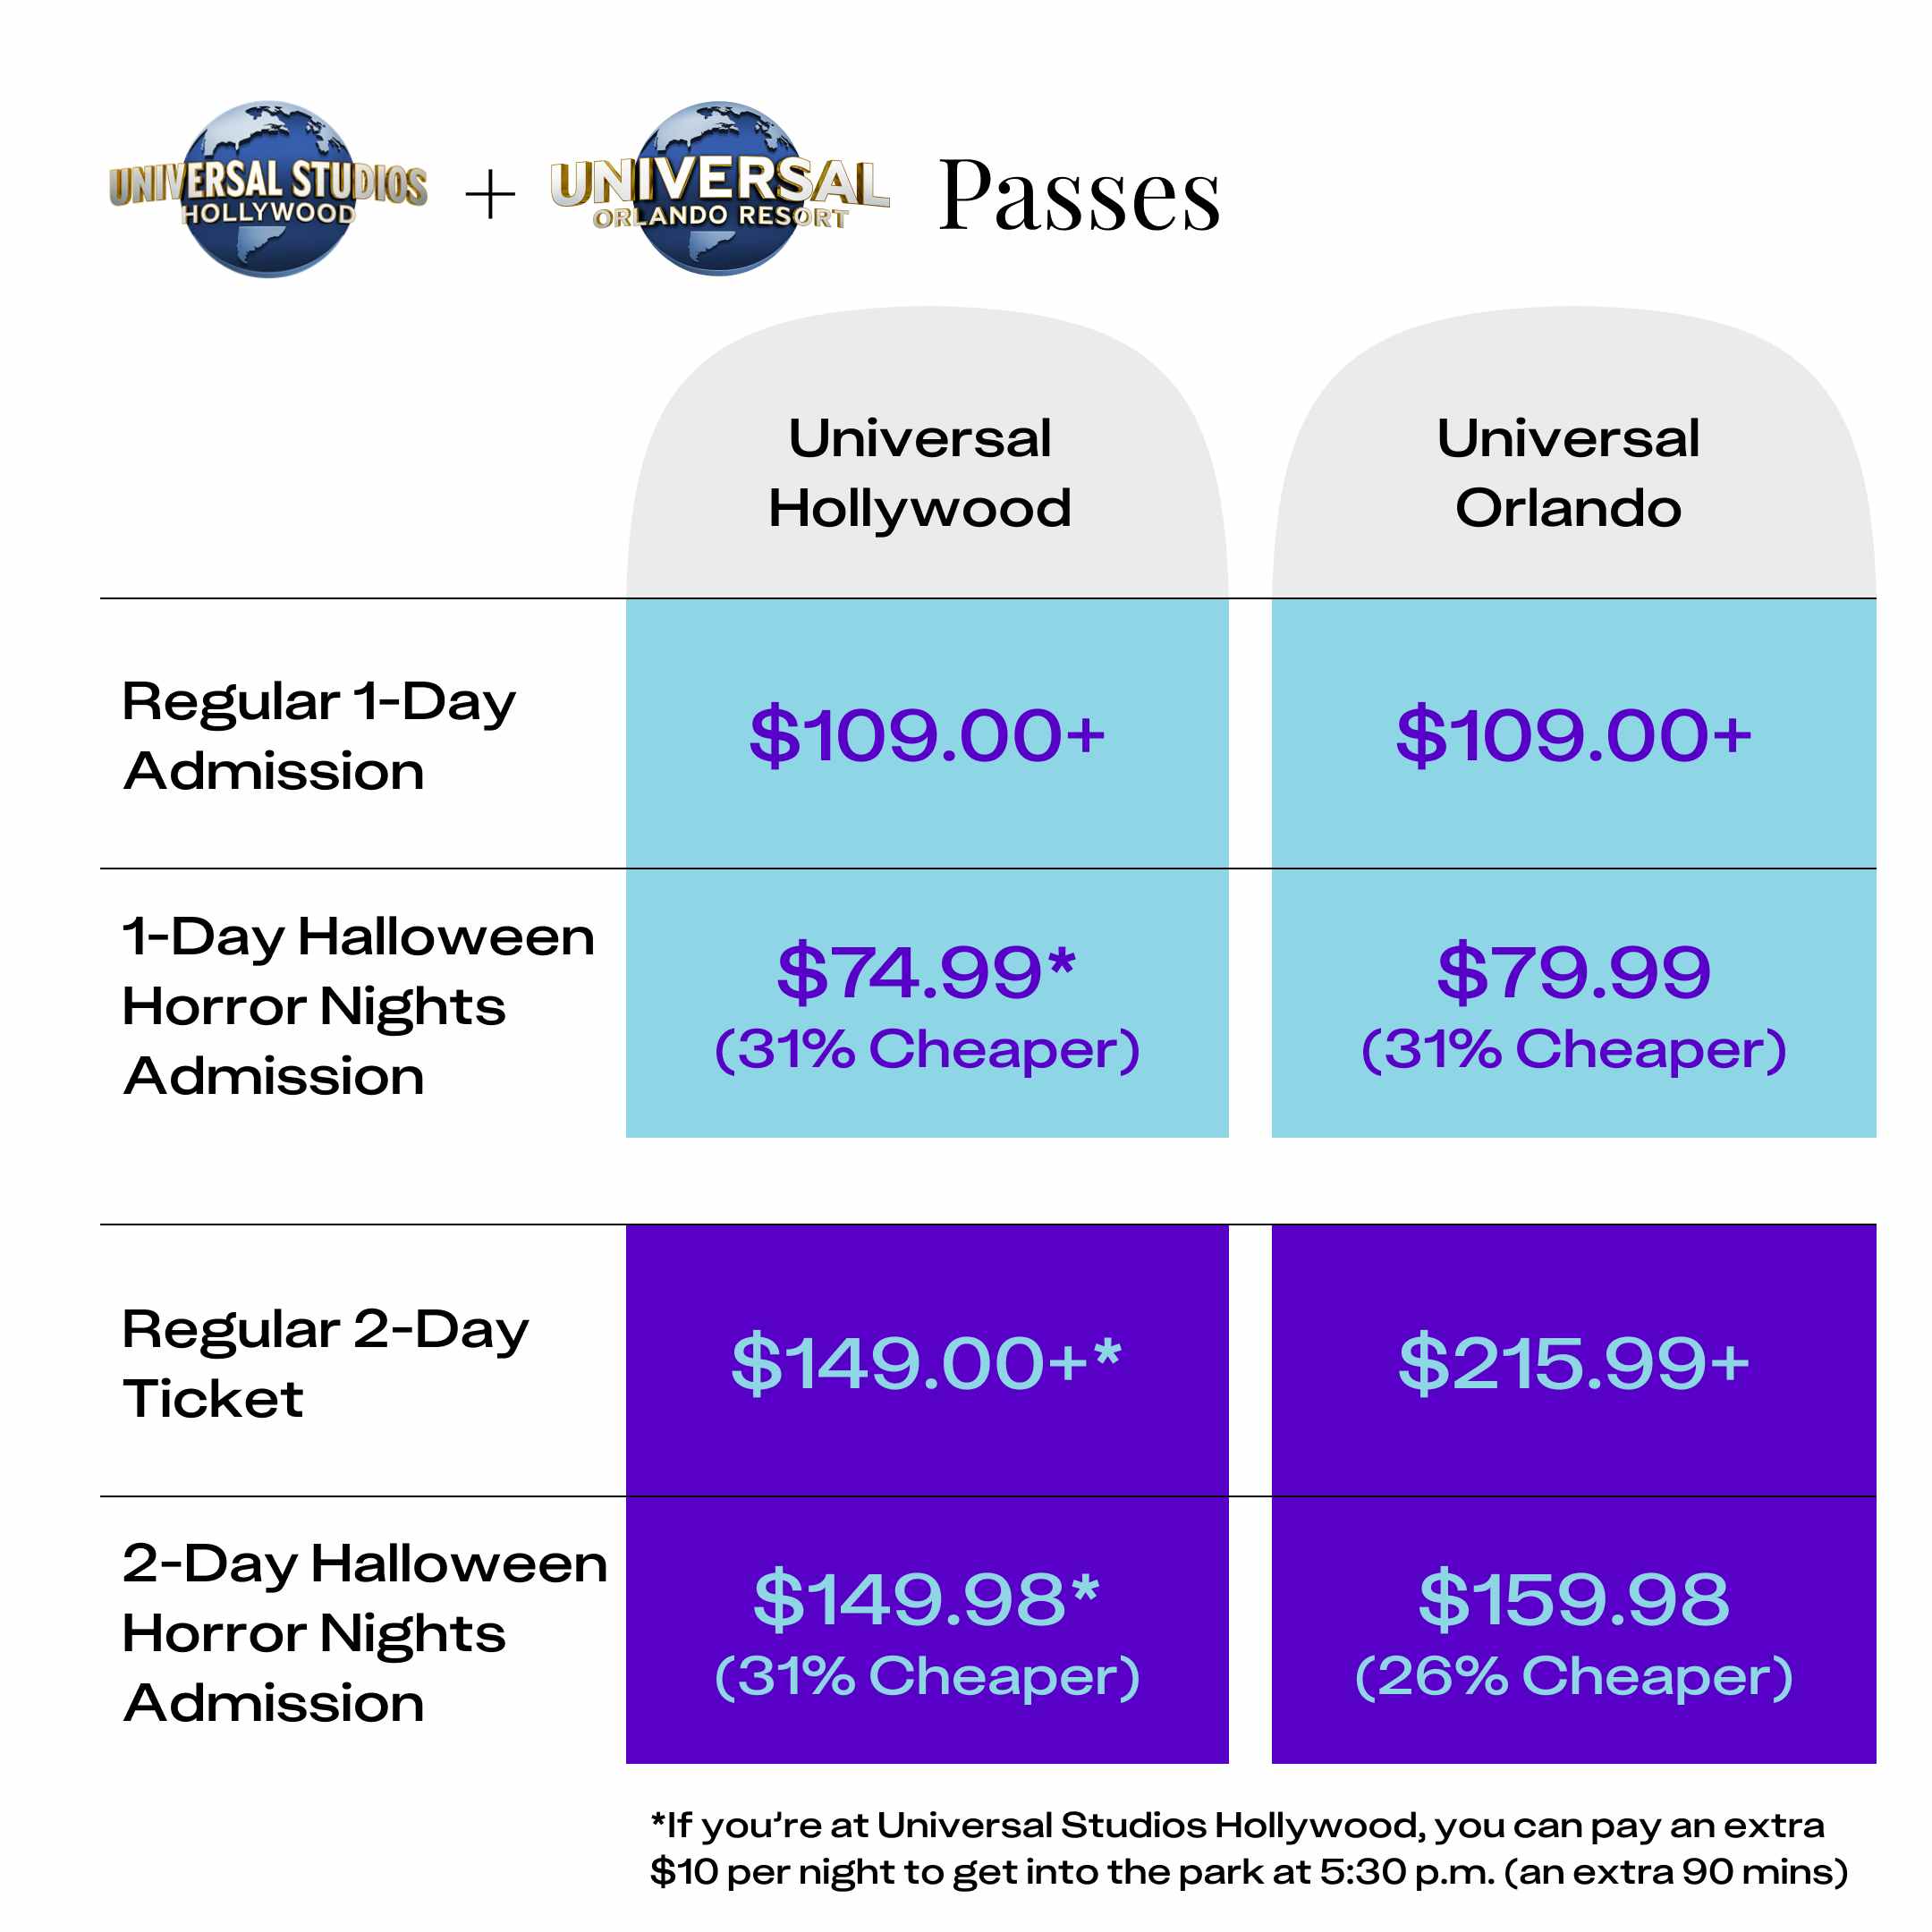 Universal Hollywood Regular 1-day admission: $109+ 1-day Halloween Horror Nights admission: $74.99 (31% cheaper) Regular 2-day ticket: $149+ 2 days of Halloween Horror Nights admission: $149.98 (marginally cheaper) Bonus: If you're at Universal Studios Hollywood, you can pay an extra $10 to get into the park at 5:30 p.m. — an extra 90 mins. Universal Orlando Regular 1-day admission: $109+ 1-day Halloween Horror Nights admission: $79.99 (31% cheaper) Regular 2-day ticket: $215.99+ 2 days of Halloween Horror Nights admission: $159.98 (26% cheaper)